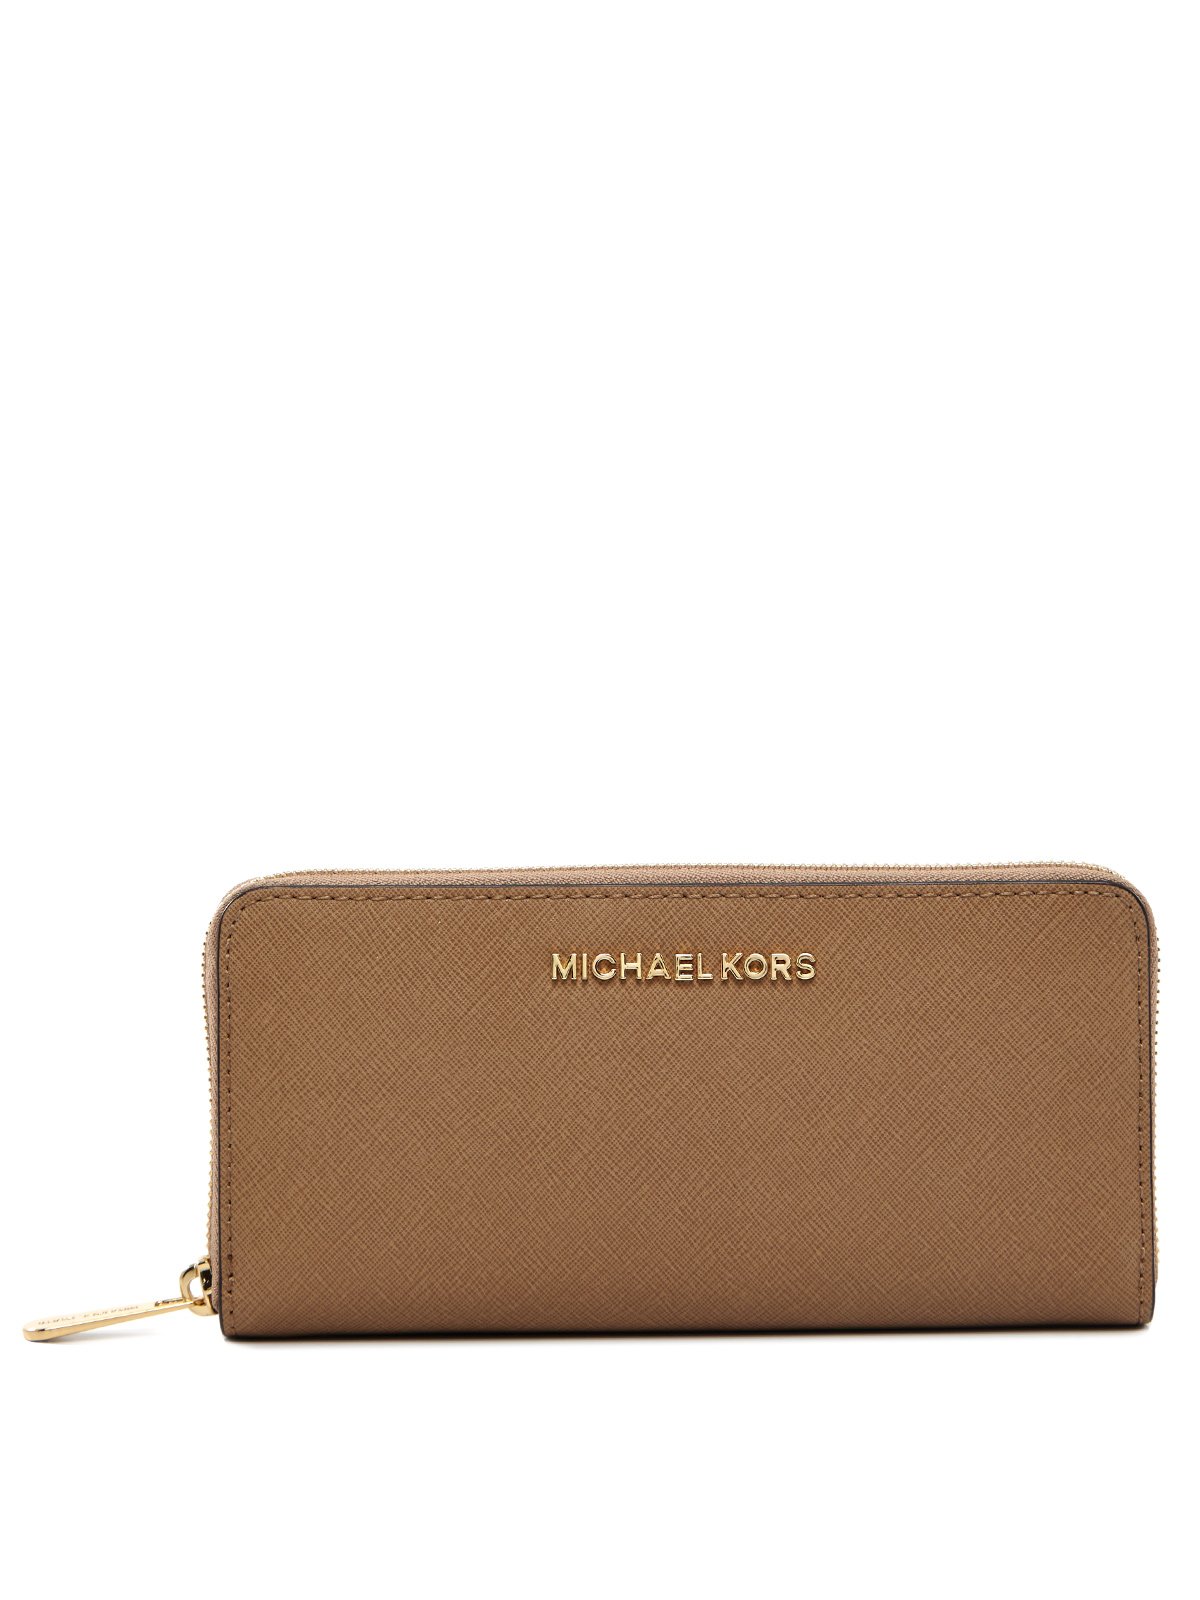 Michael Kors Bedford Travel Passport Wallet  Summer Box 2020   SPOILER  ALERT Were dreaming of our next vayk destination and when we can hop on  a plane again well be